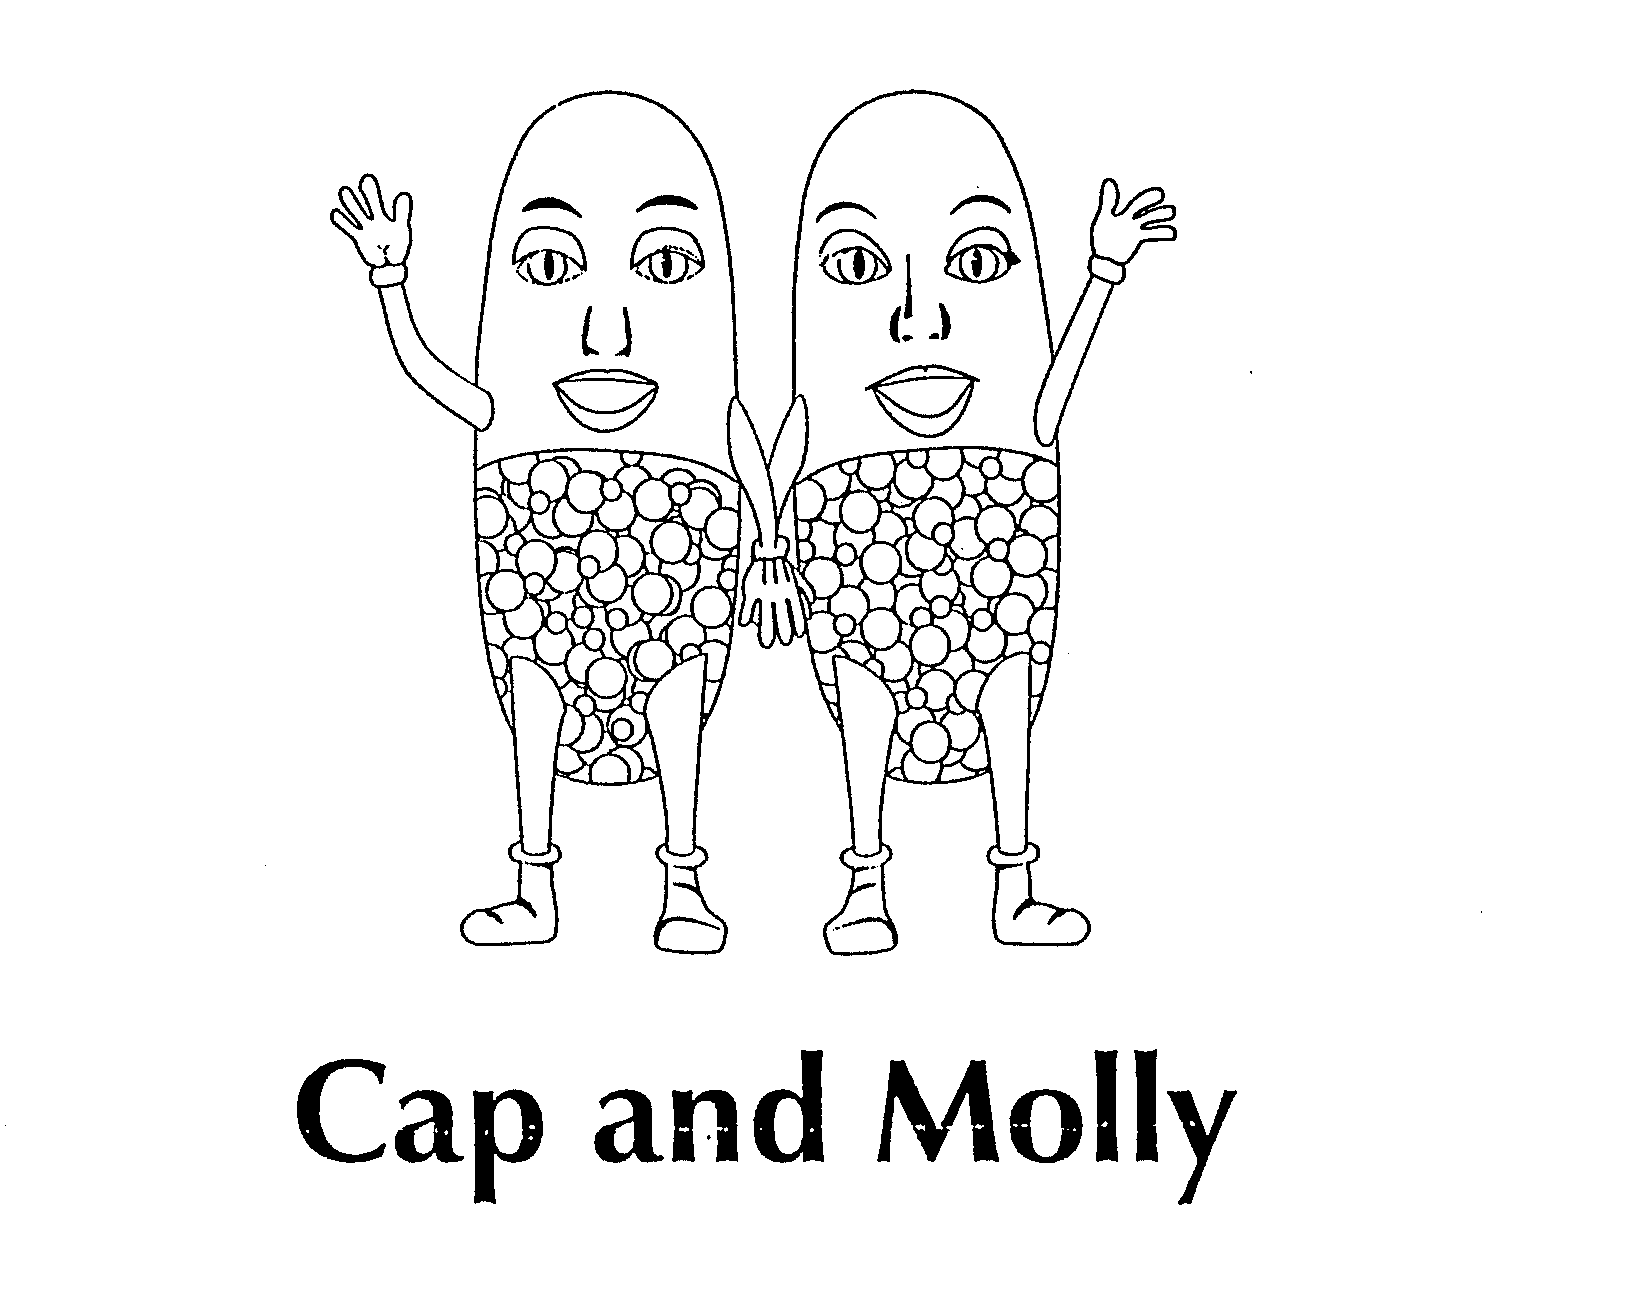  CAP AND MOLLY